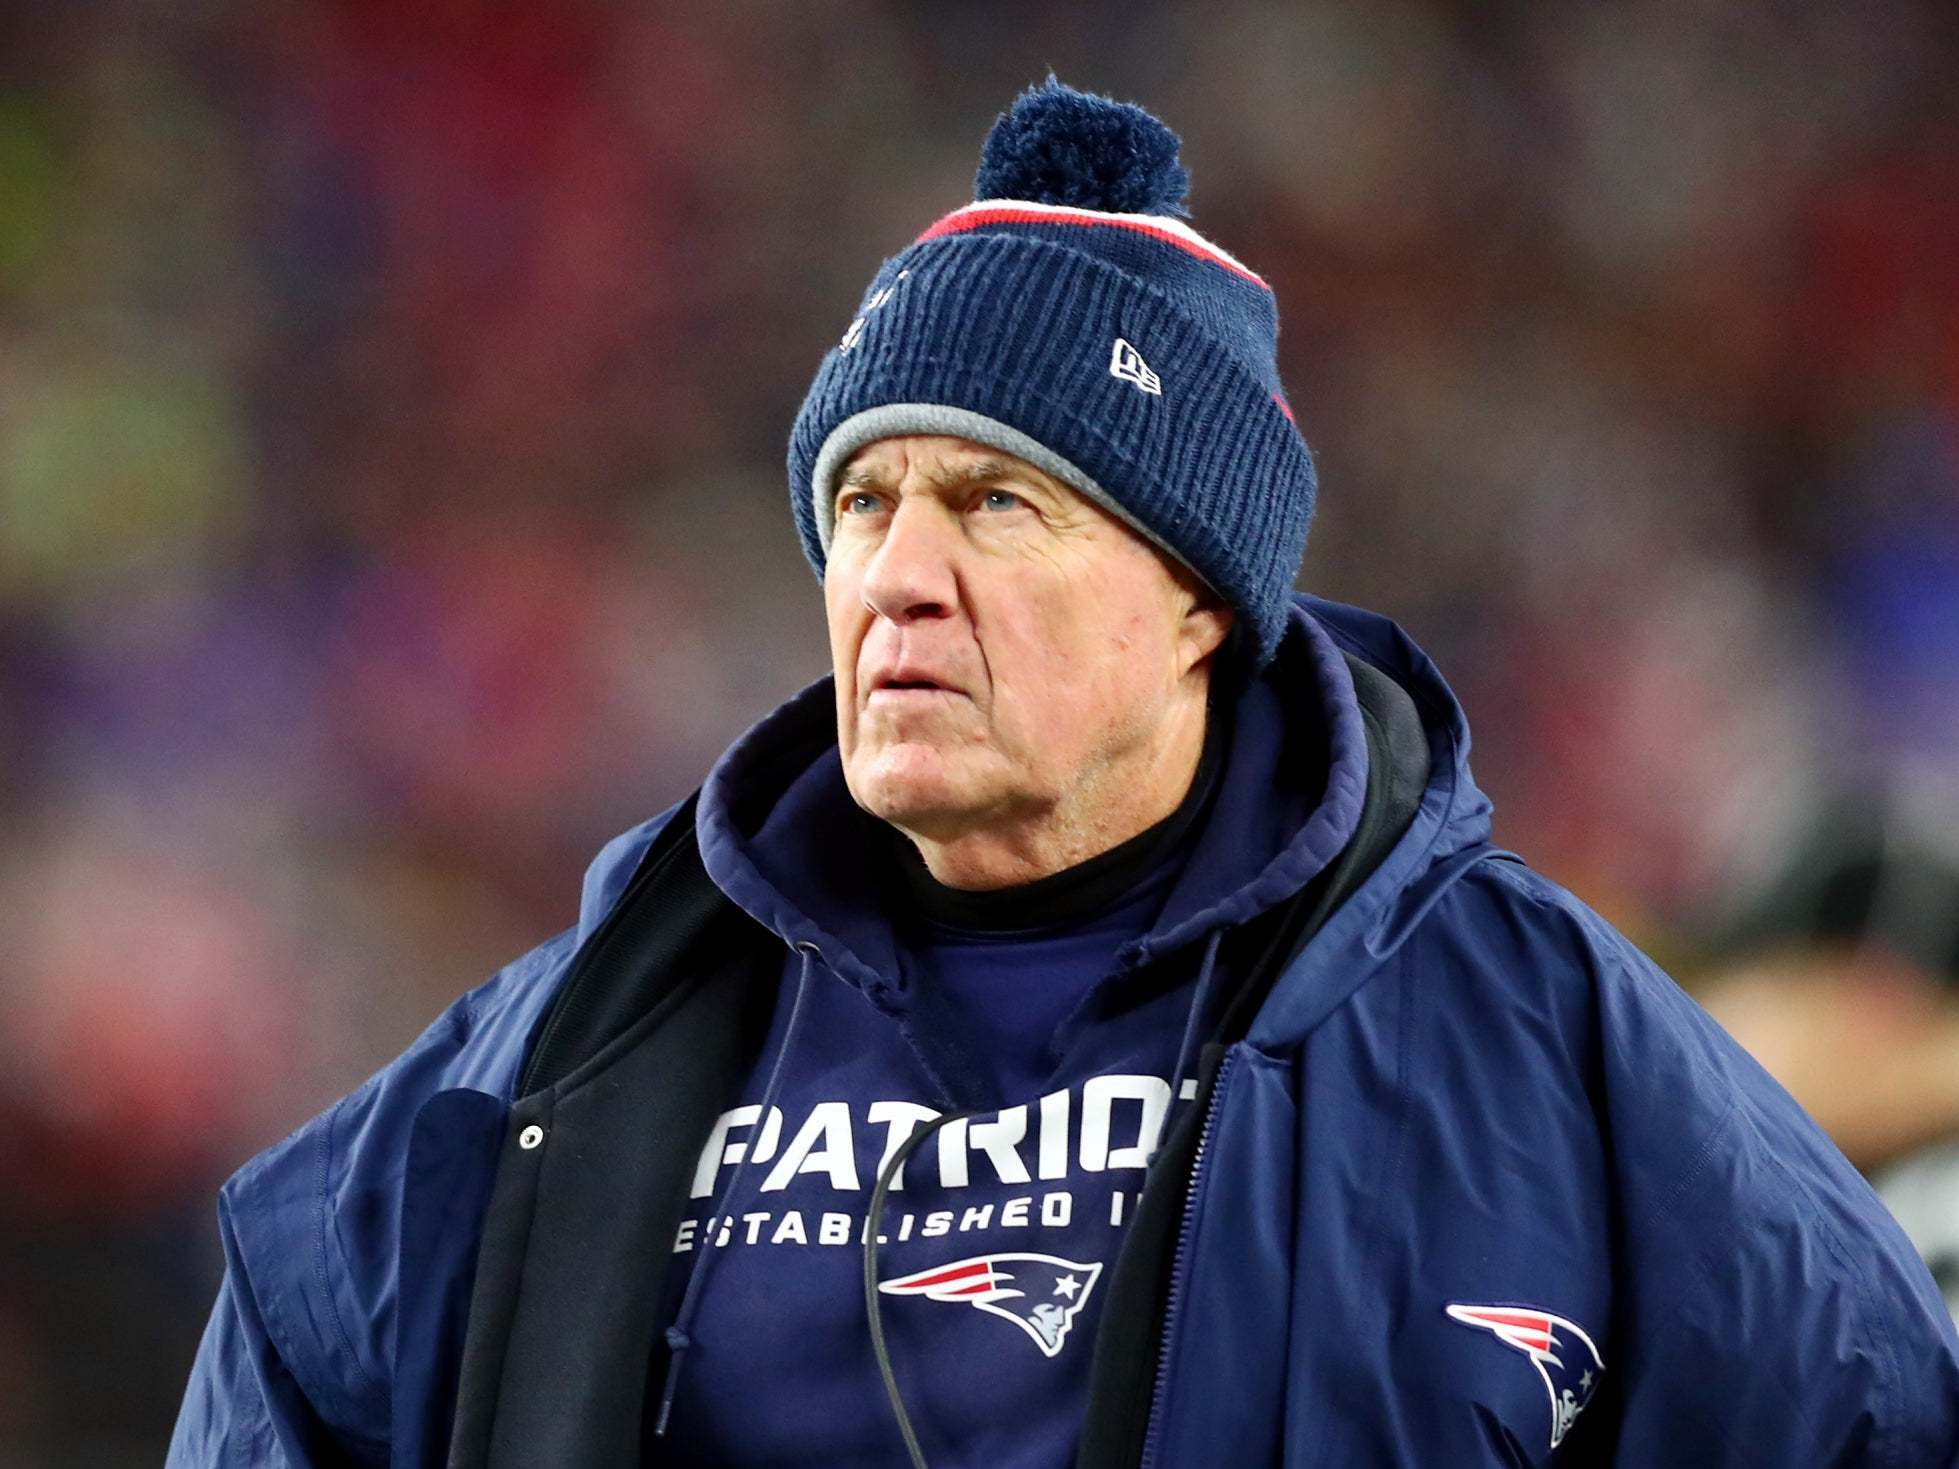 Patriots head coach Bill Belichick was fined for his part in Spygate back in 2007